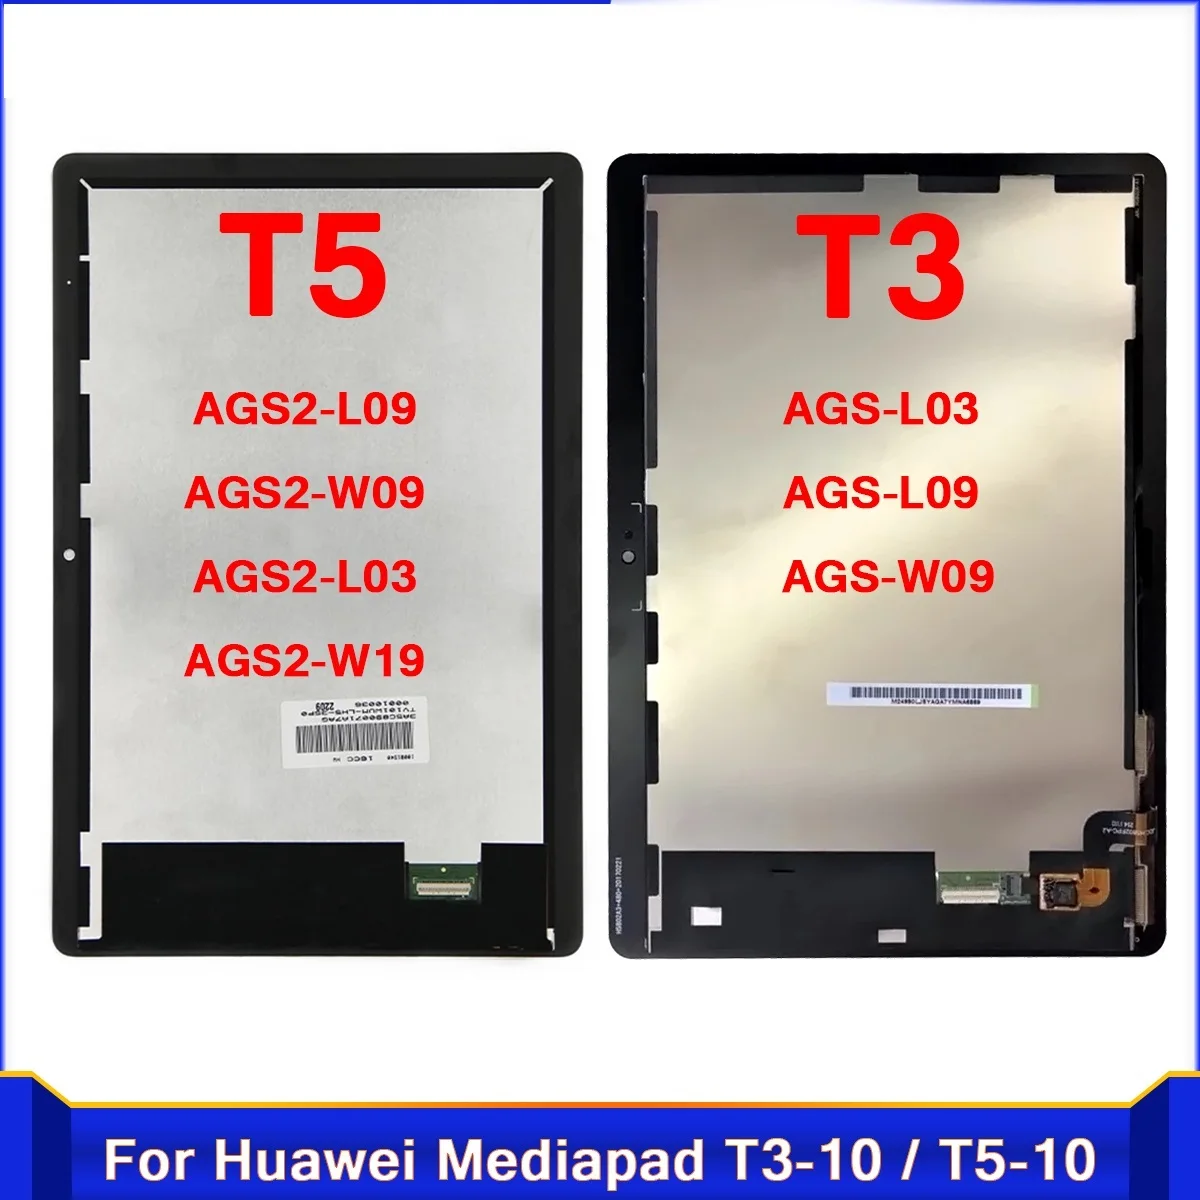 

Test LCD Display For Huawei MediaPad T3 T5 10 AGS-L03 AGS-L09 AGS-W09 AGS2-L09 AGS2-W09 AGS2-L03 Touch Screen Digitizer Assembly